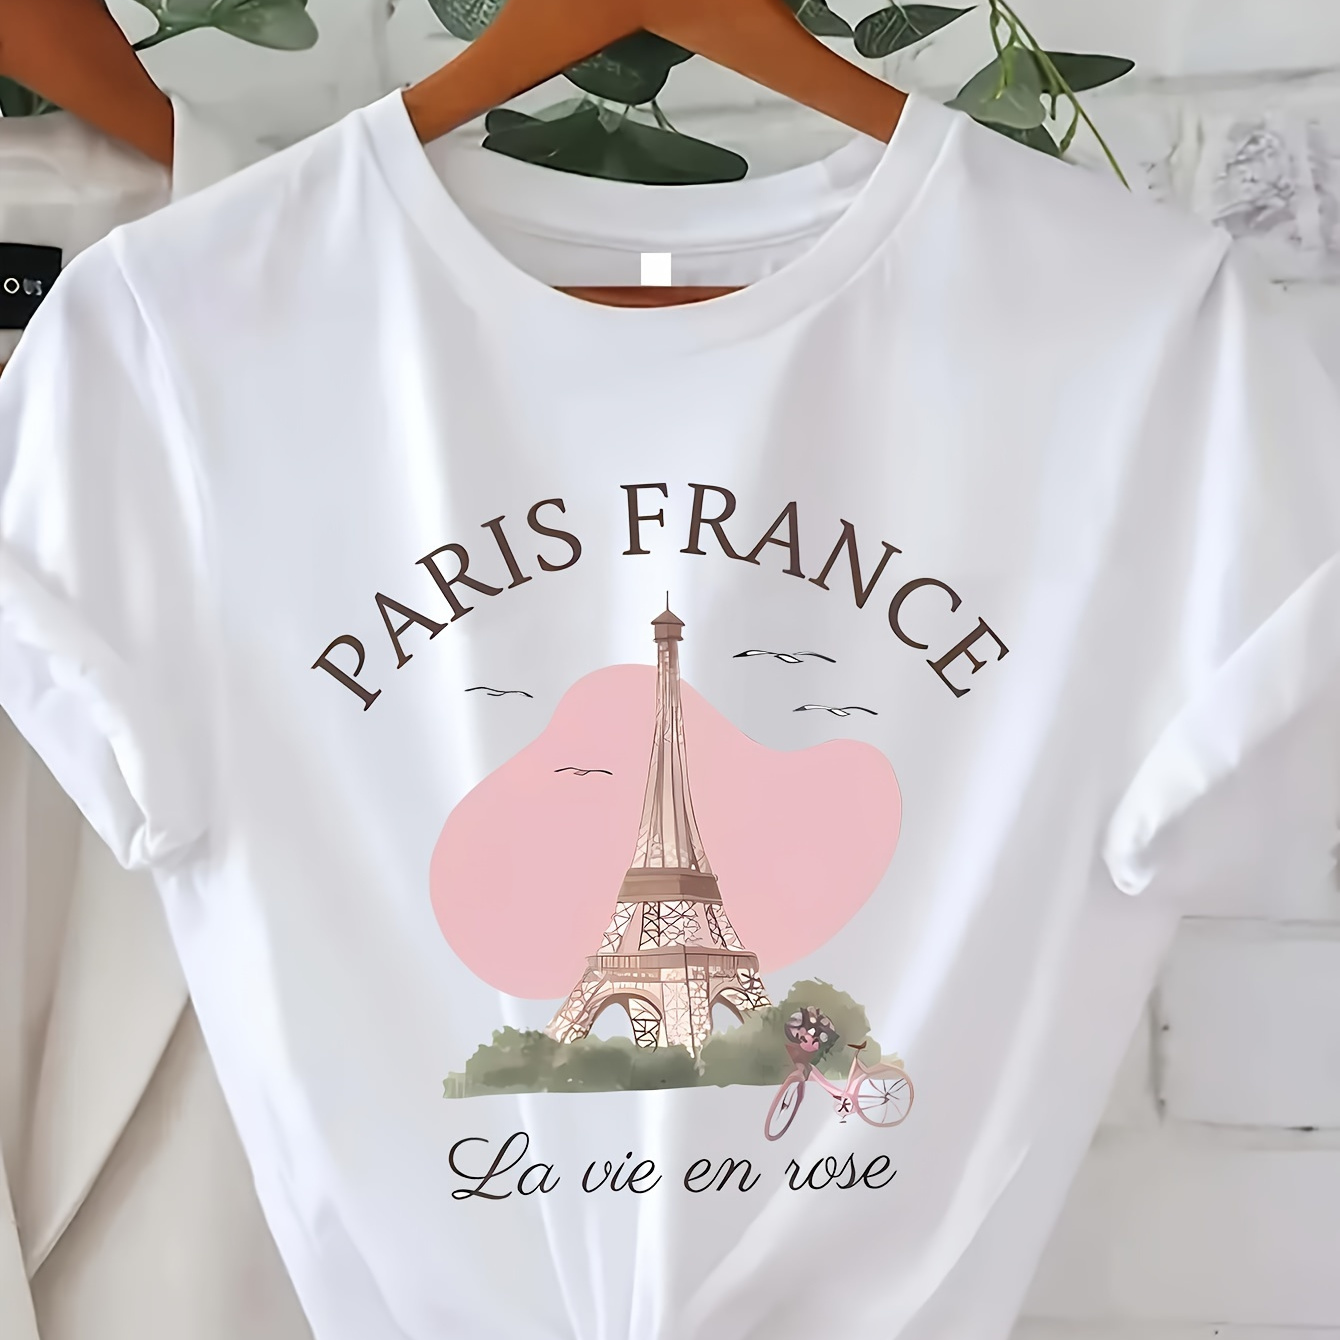 

Eiffel Tower Print T-shirt, Short Sleeve Crew Neck Casual Top For Summer & Spring, Women's Clothing